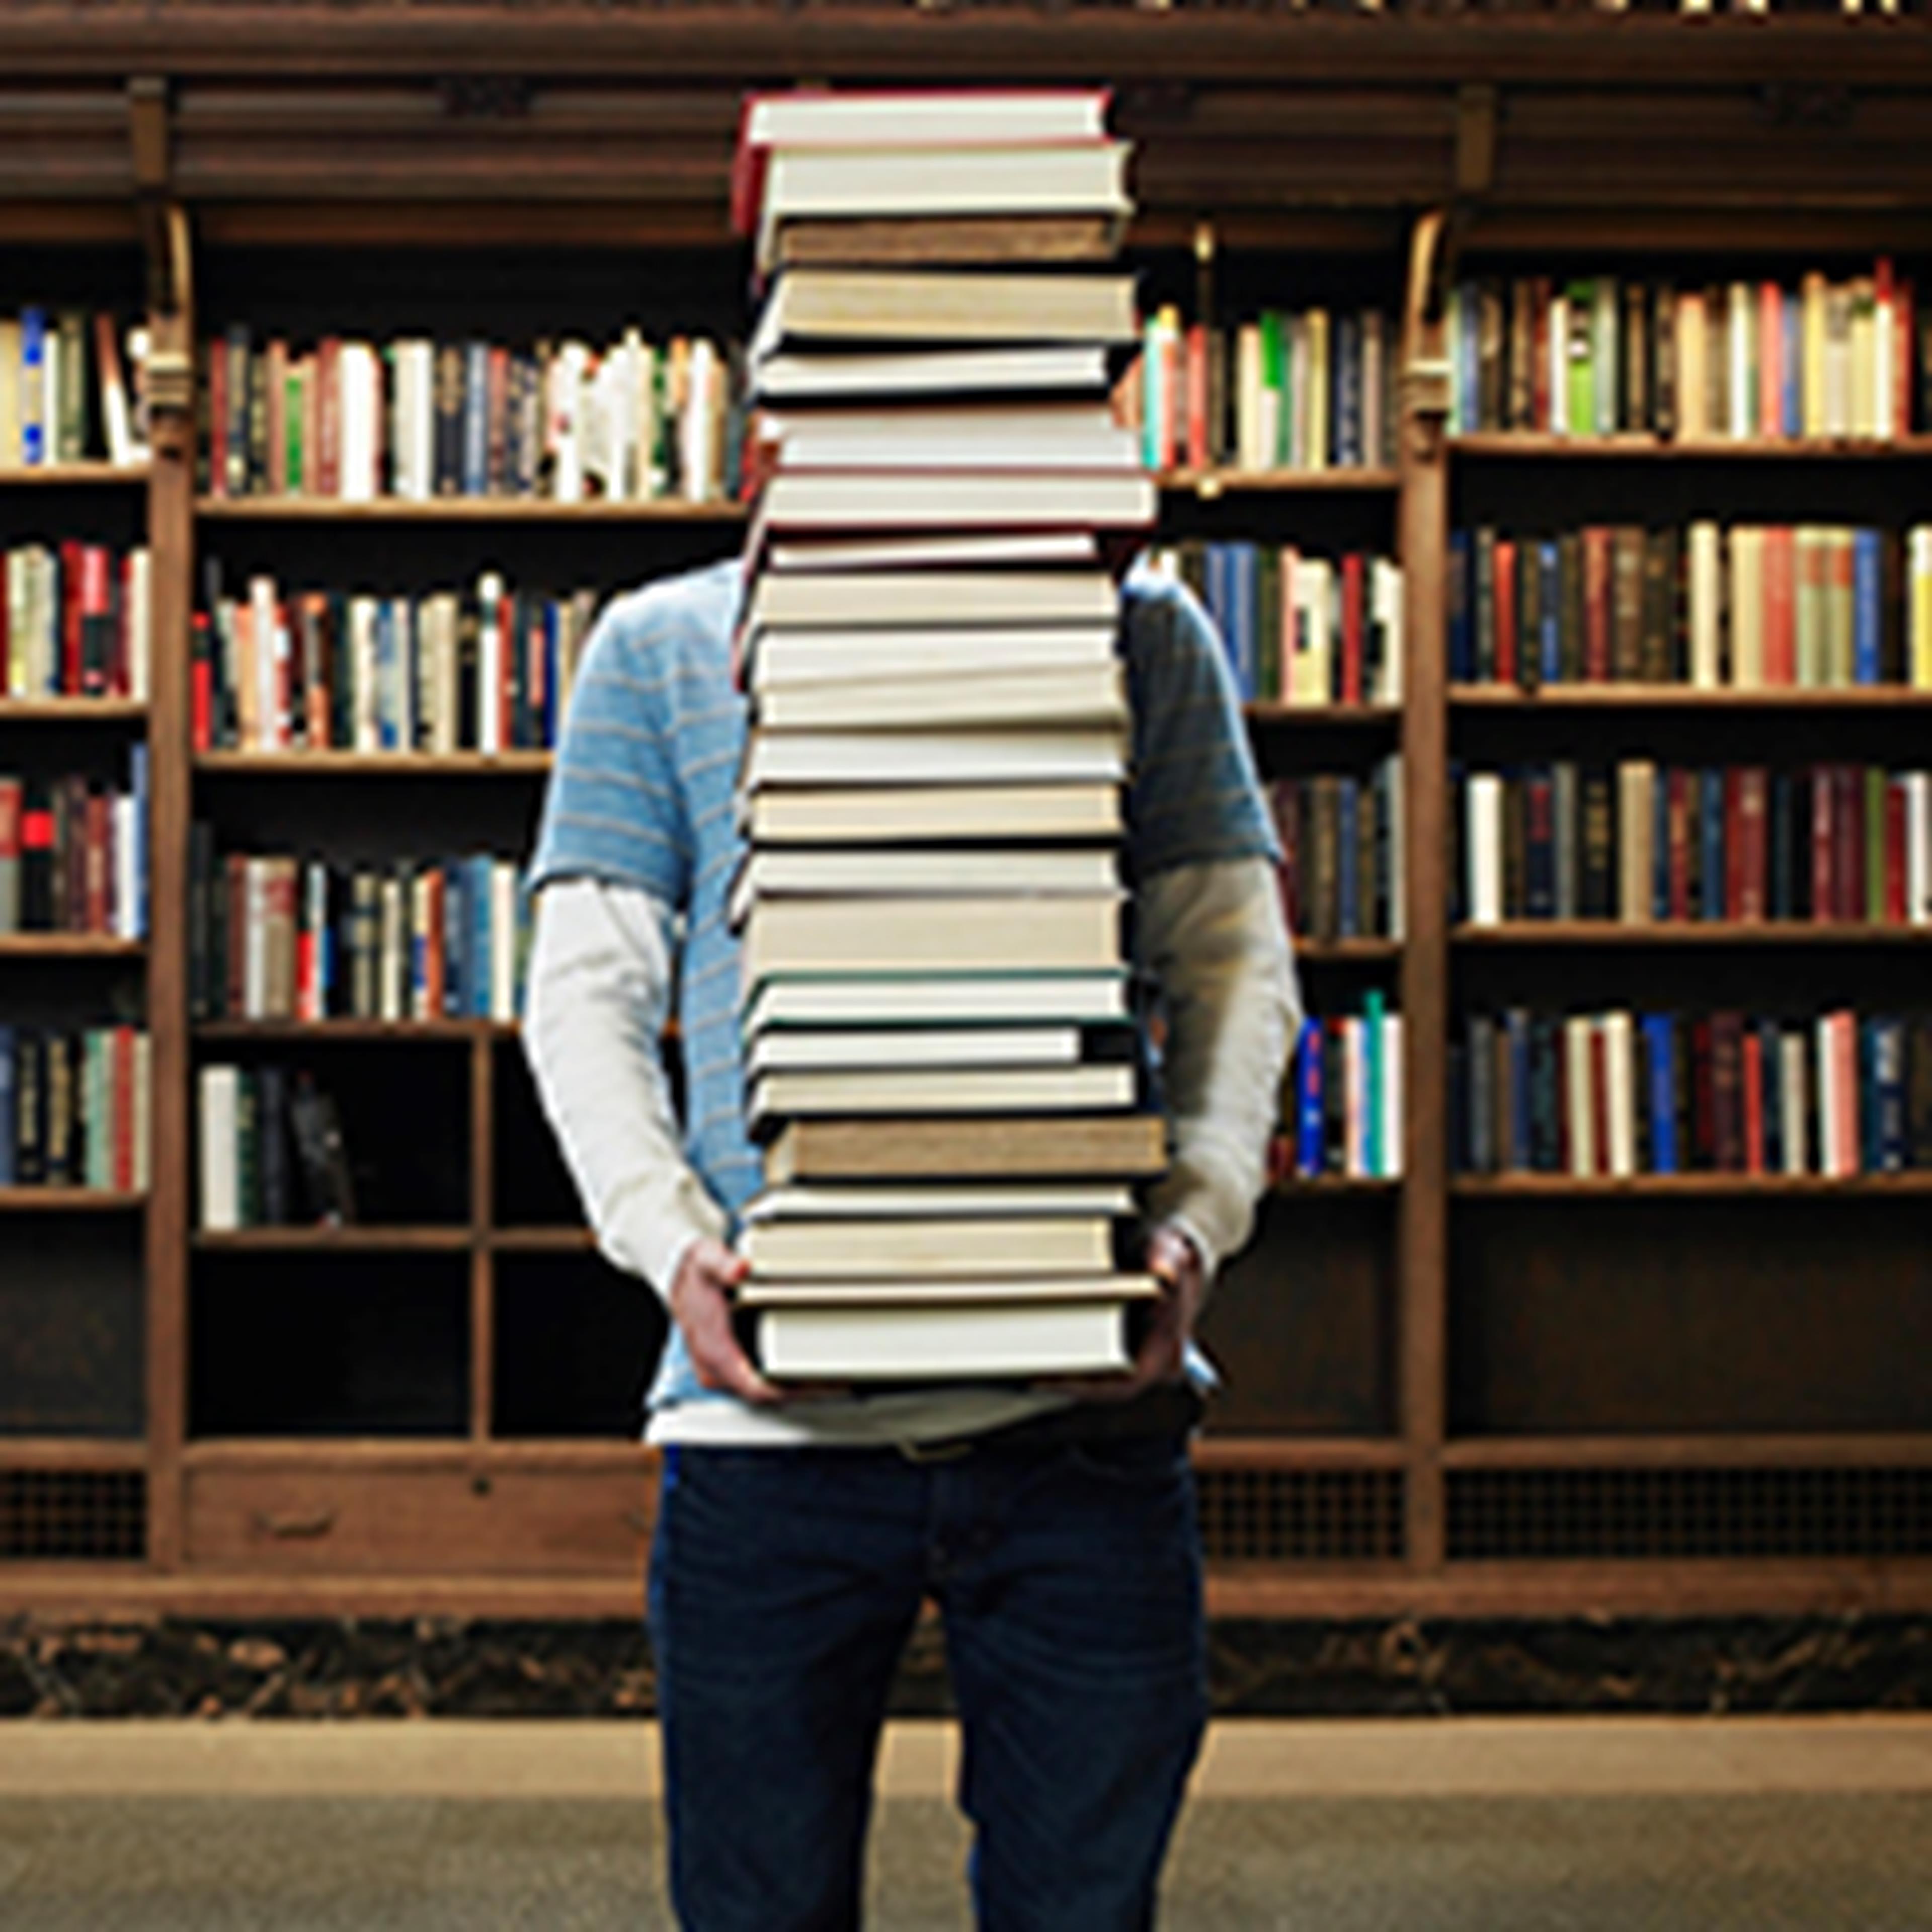 Person holding a lot of books piled in their arms in a library